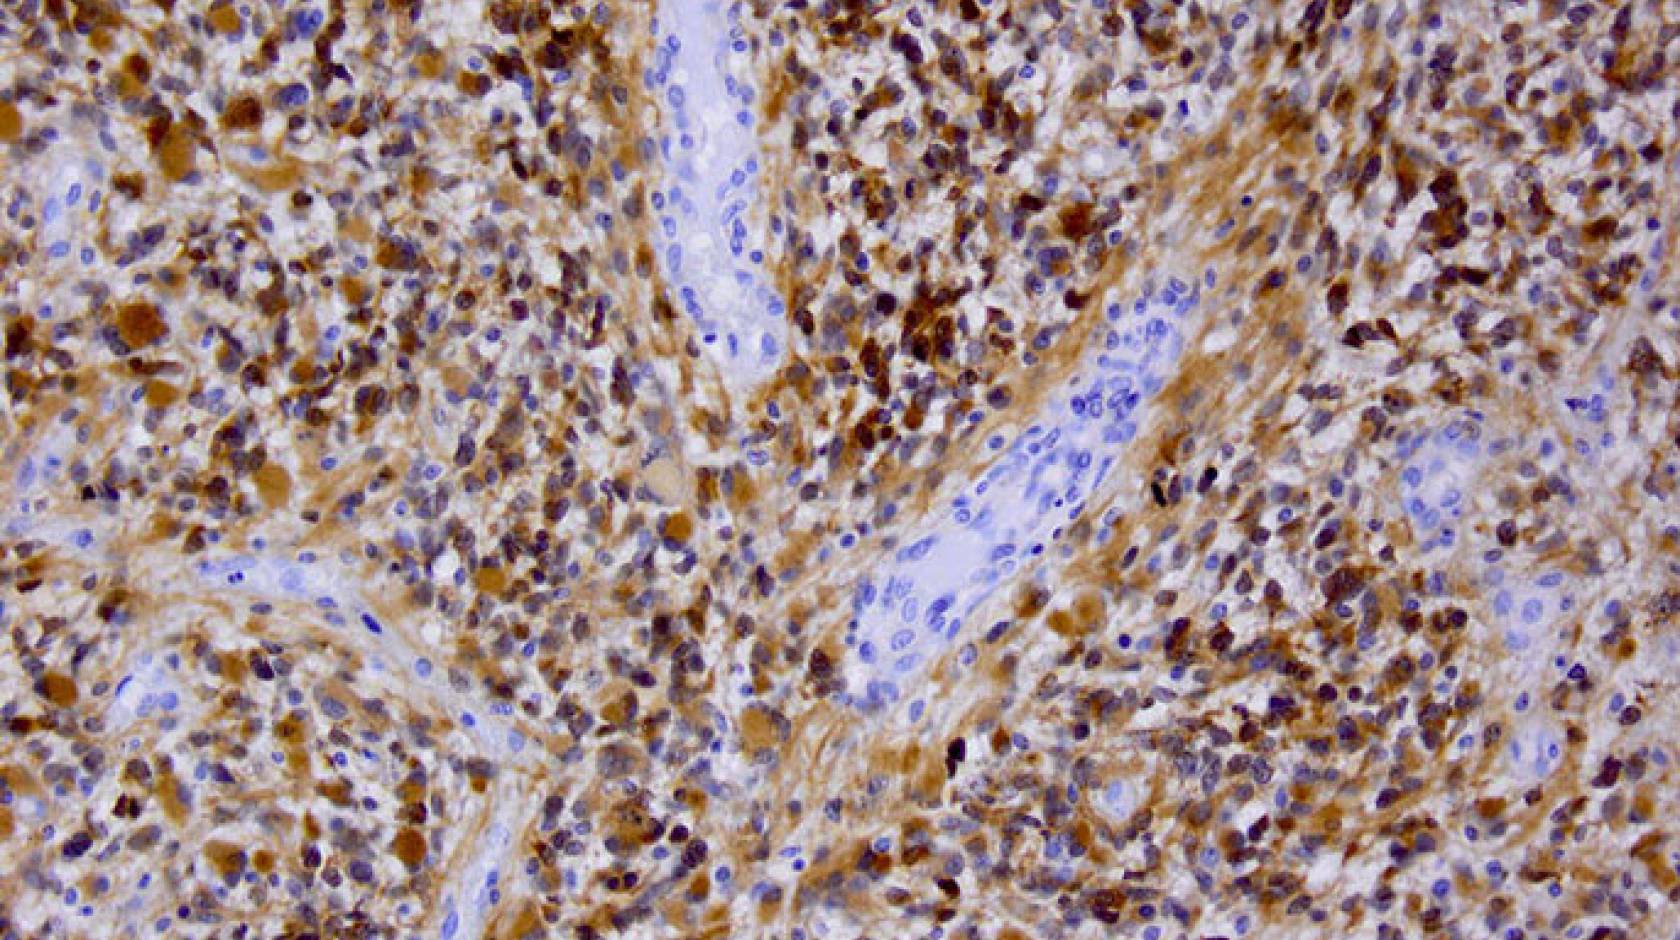 Berkeley Science review brain cancer treatment